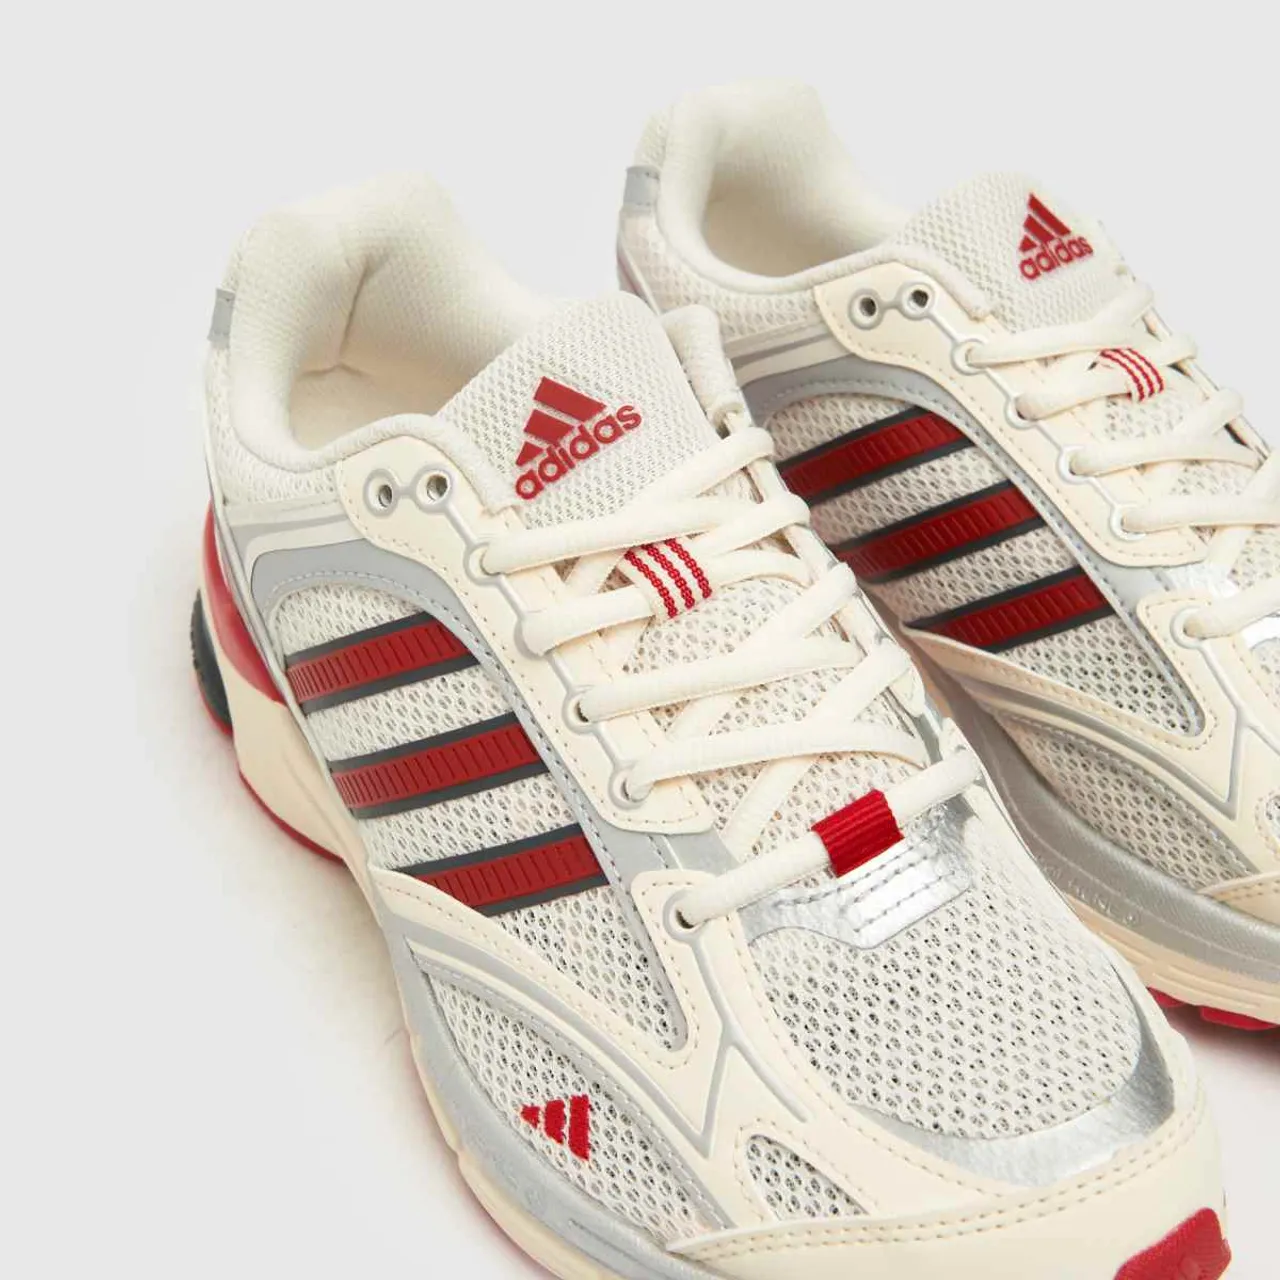 Adidas Spiritain 2000 Trainers in White & Red